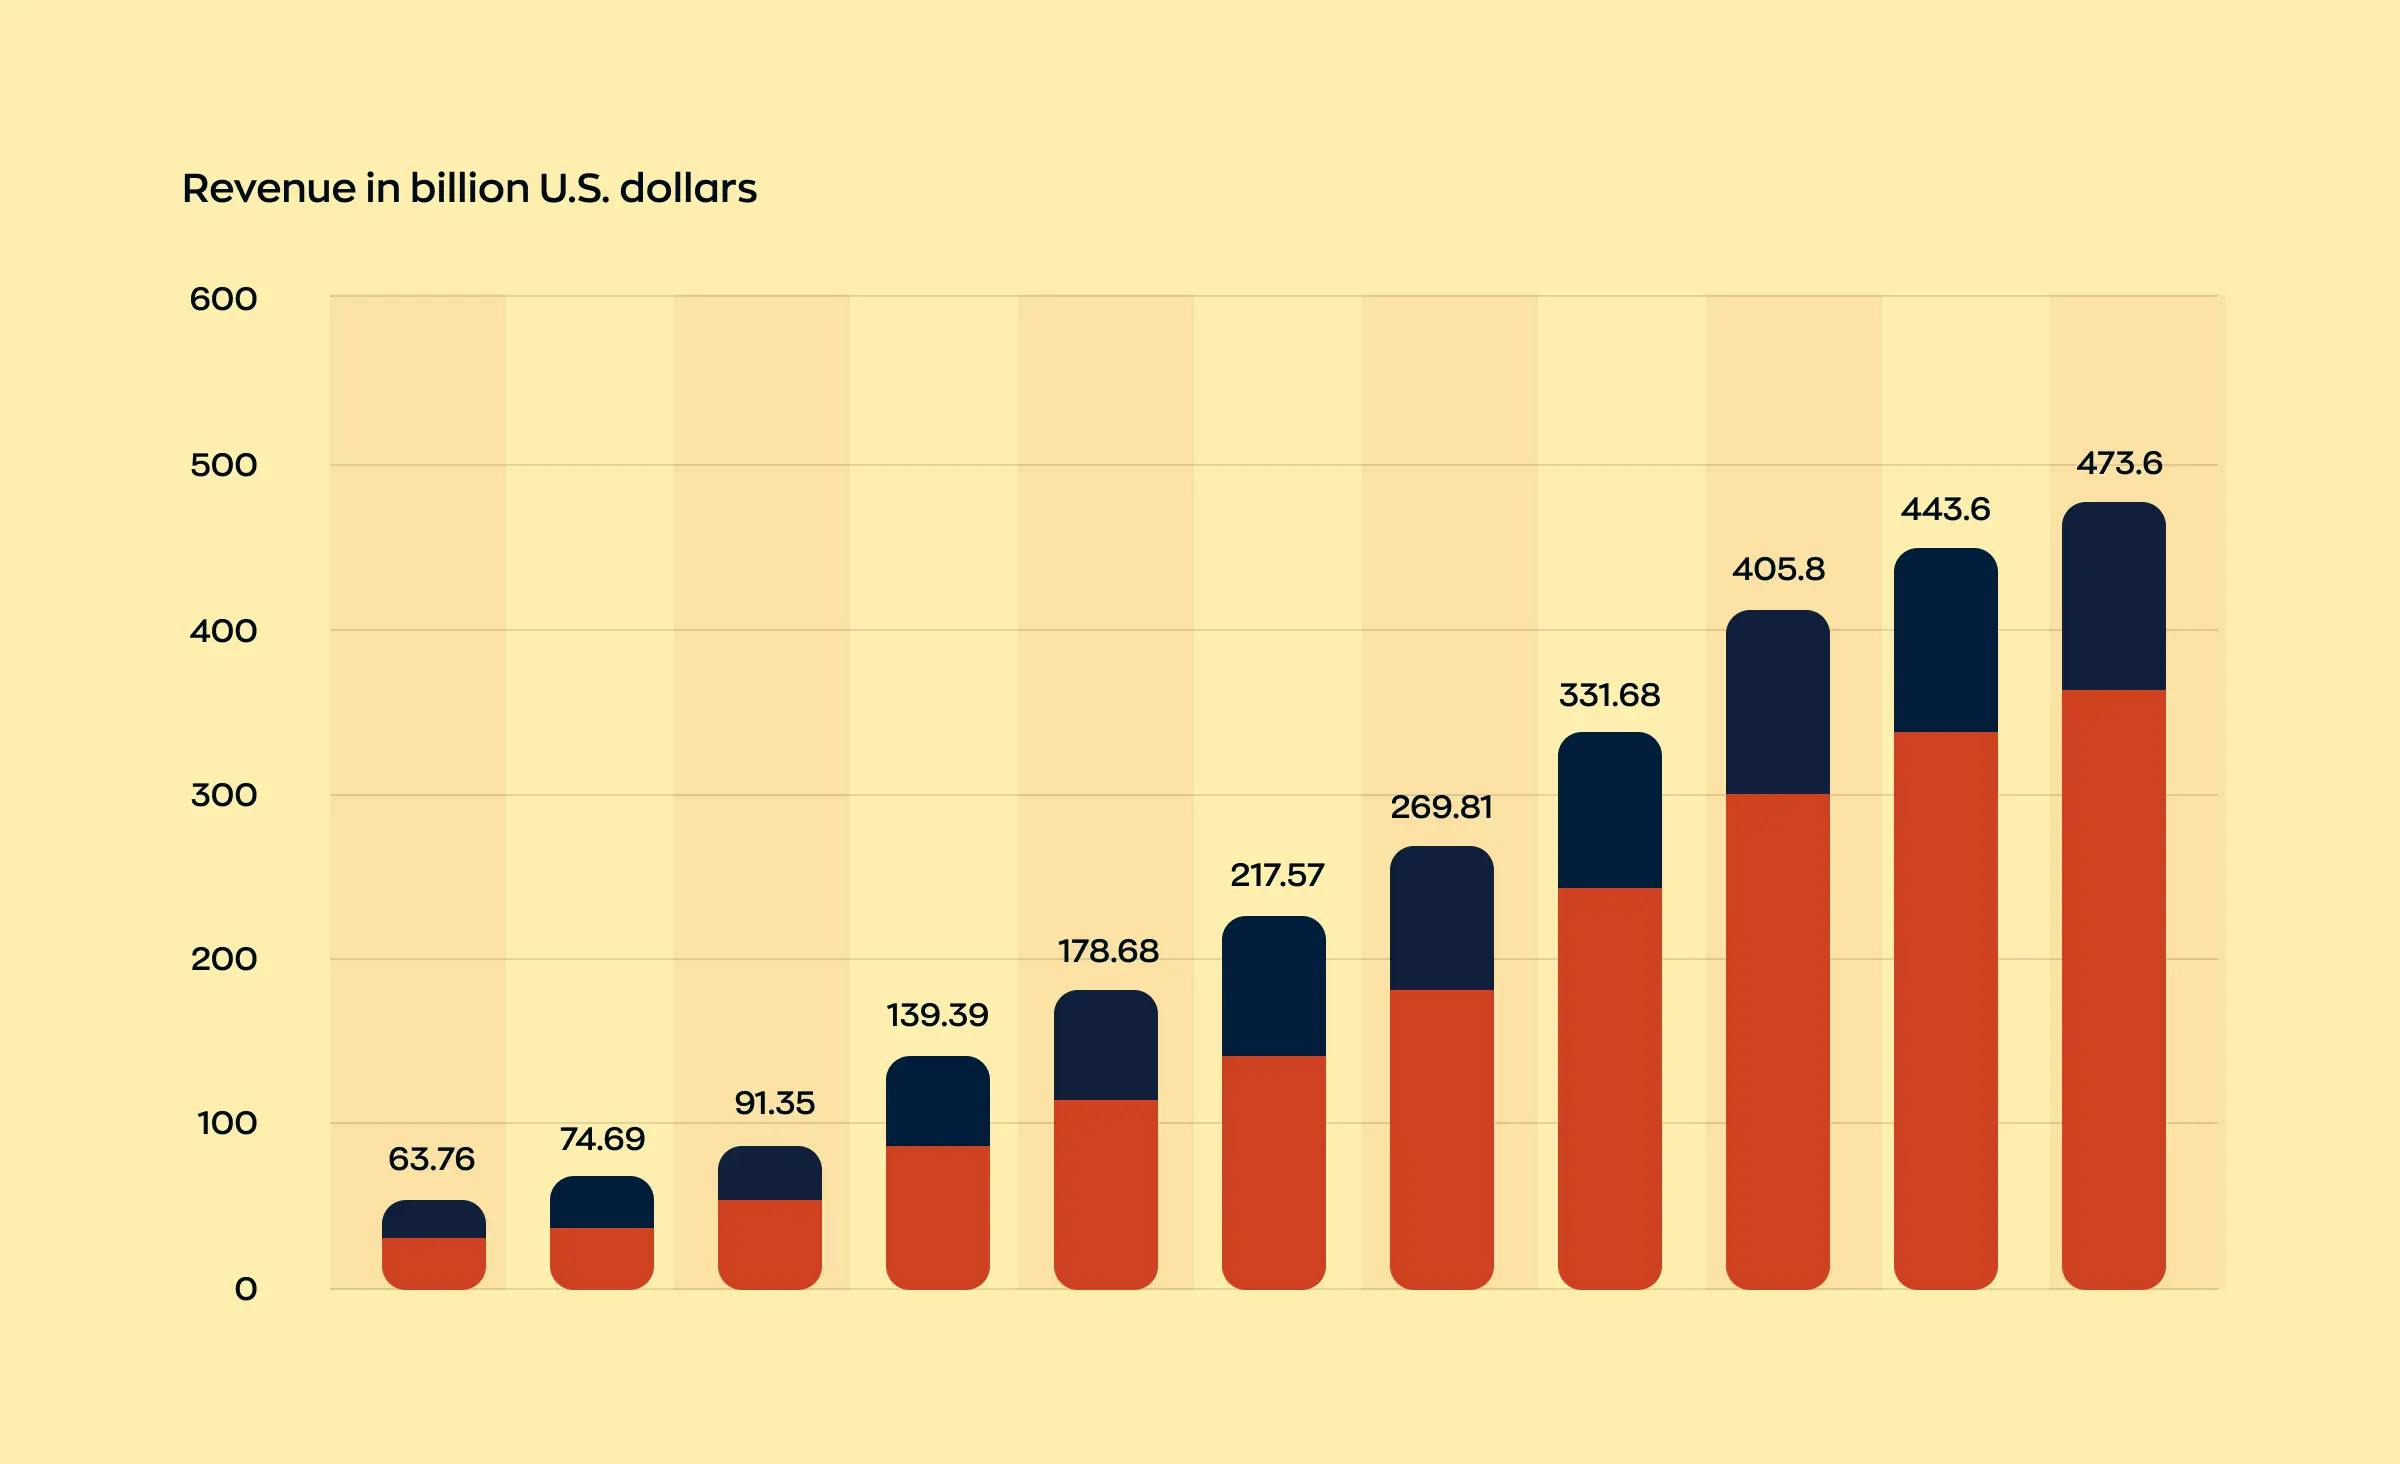 The image depicts a chart that shows a steady growth of the online food delivery sector, suggesting that food delivery app development is in demand. The revenue is expected to reach $473.6B.